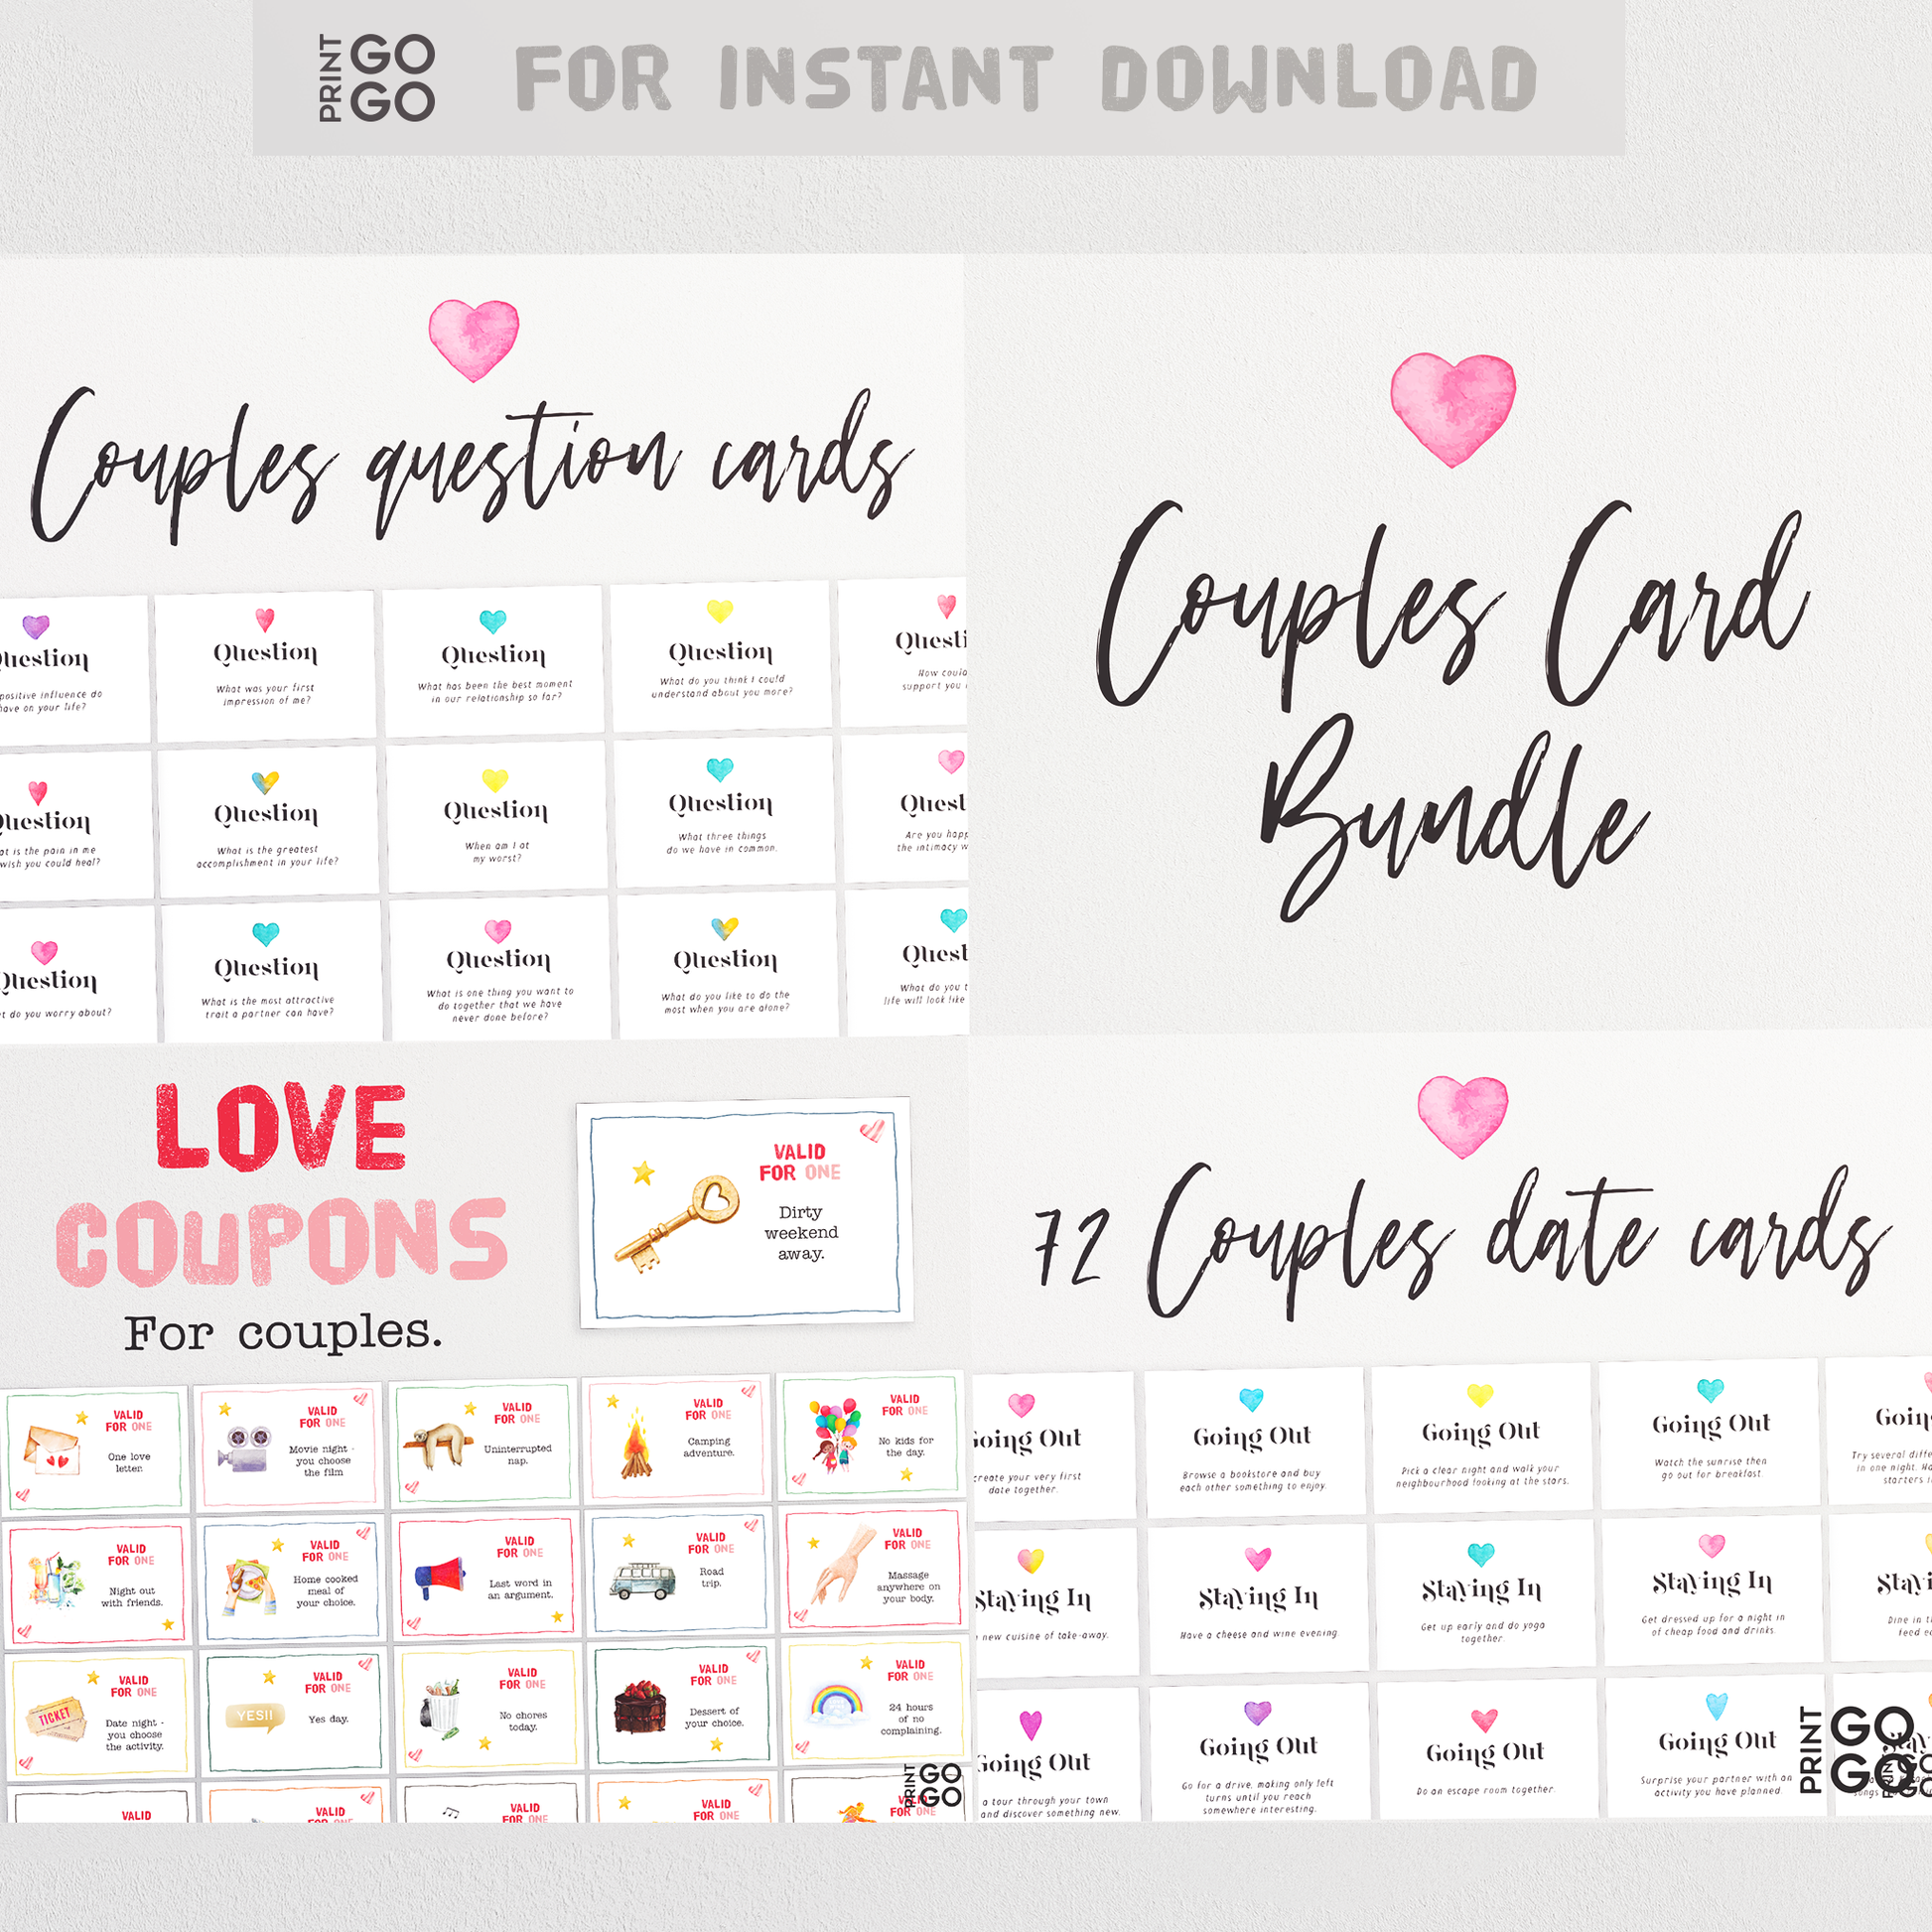 Couples Cards Bundle - Date Night Ideas, Question Cards and Coupons!